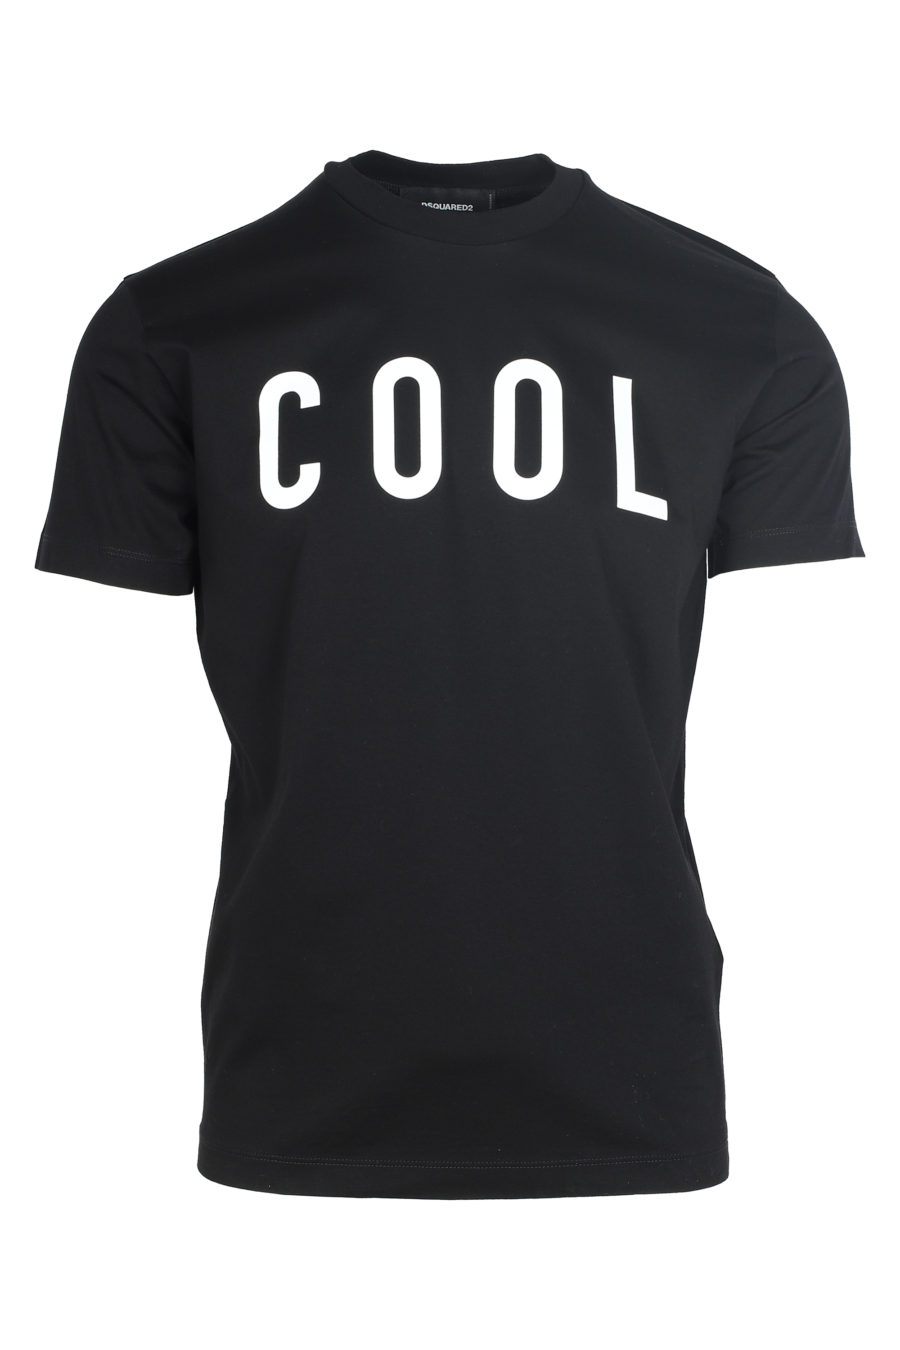 Black "Cool" T-shirt in white - IMG 5909